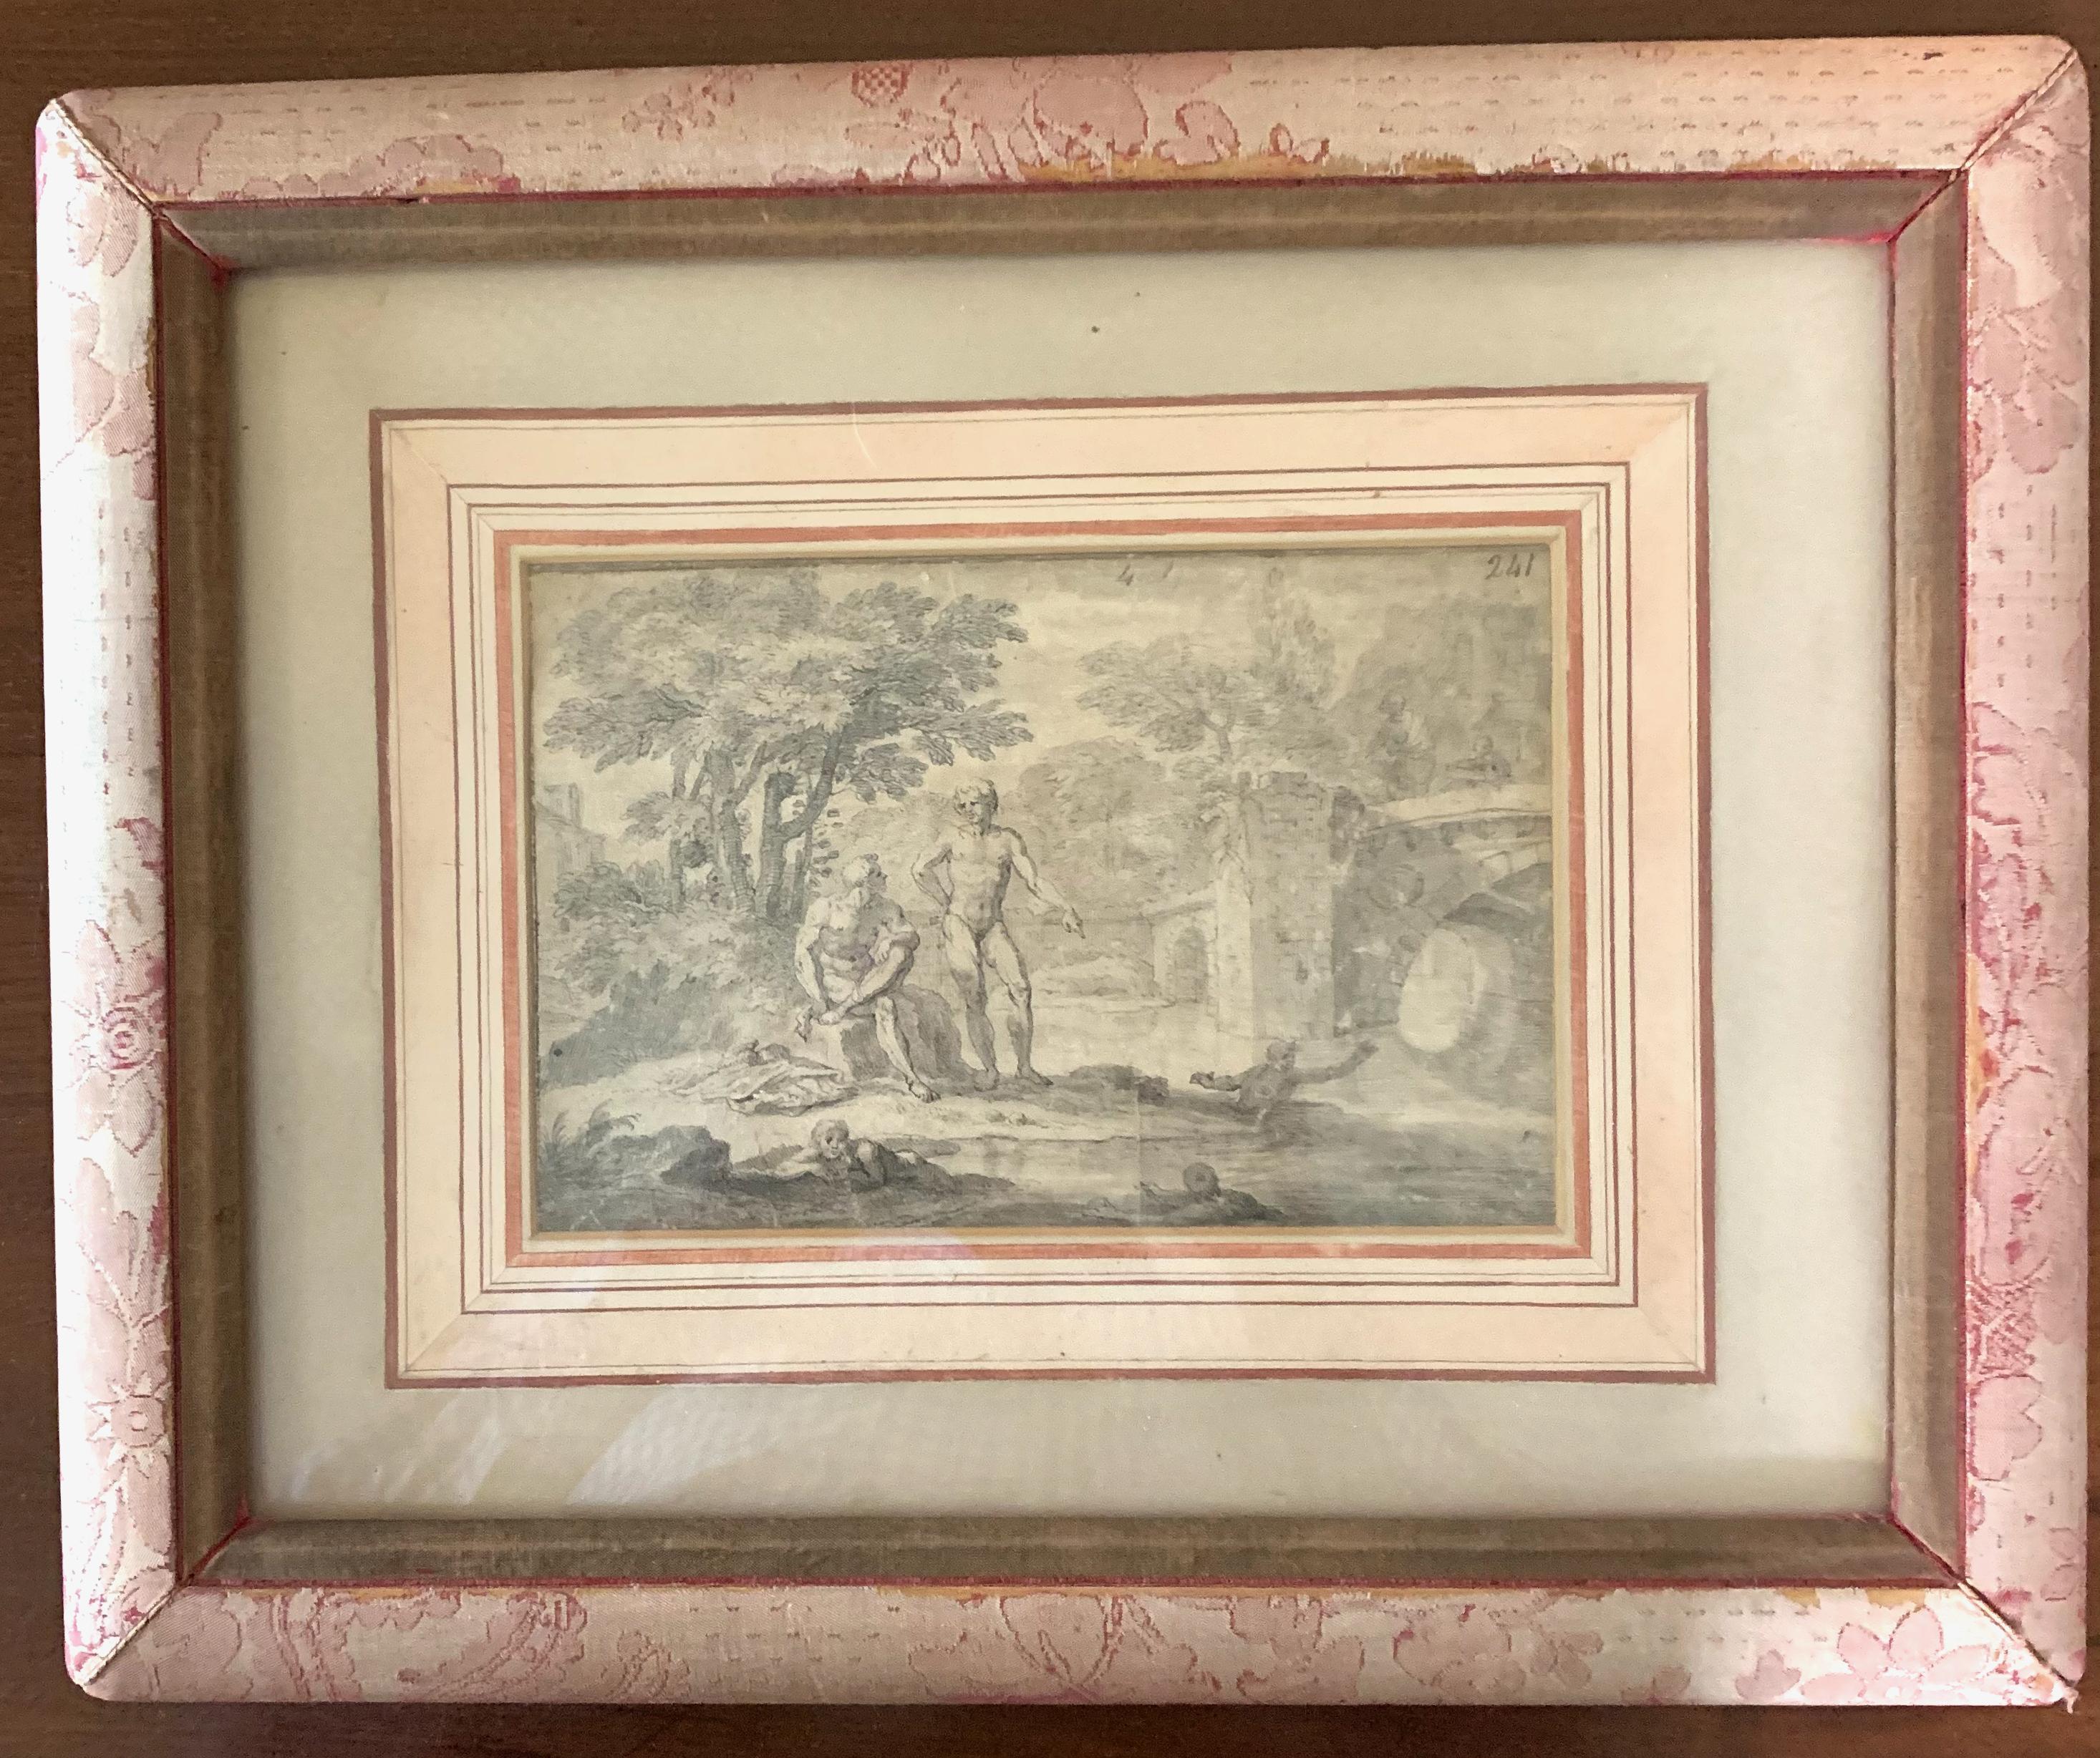 A 17th century engraving of a waterside scene with bathers at the water's edge by Dutch artist Isaac de Moucheron (1667-1774) set in a silk brocade covered frame with early French matte.